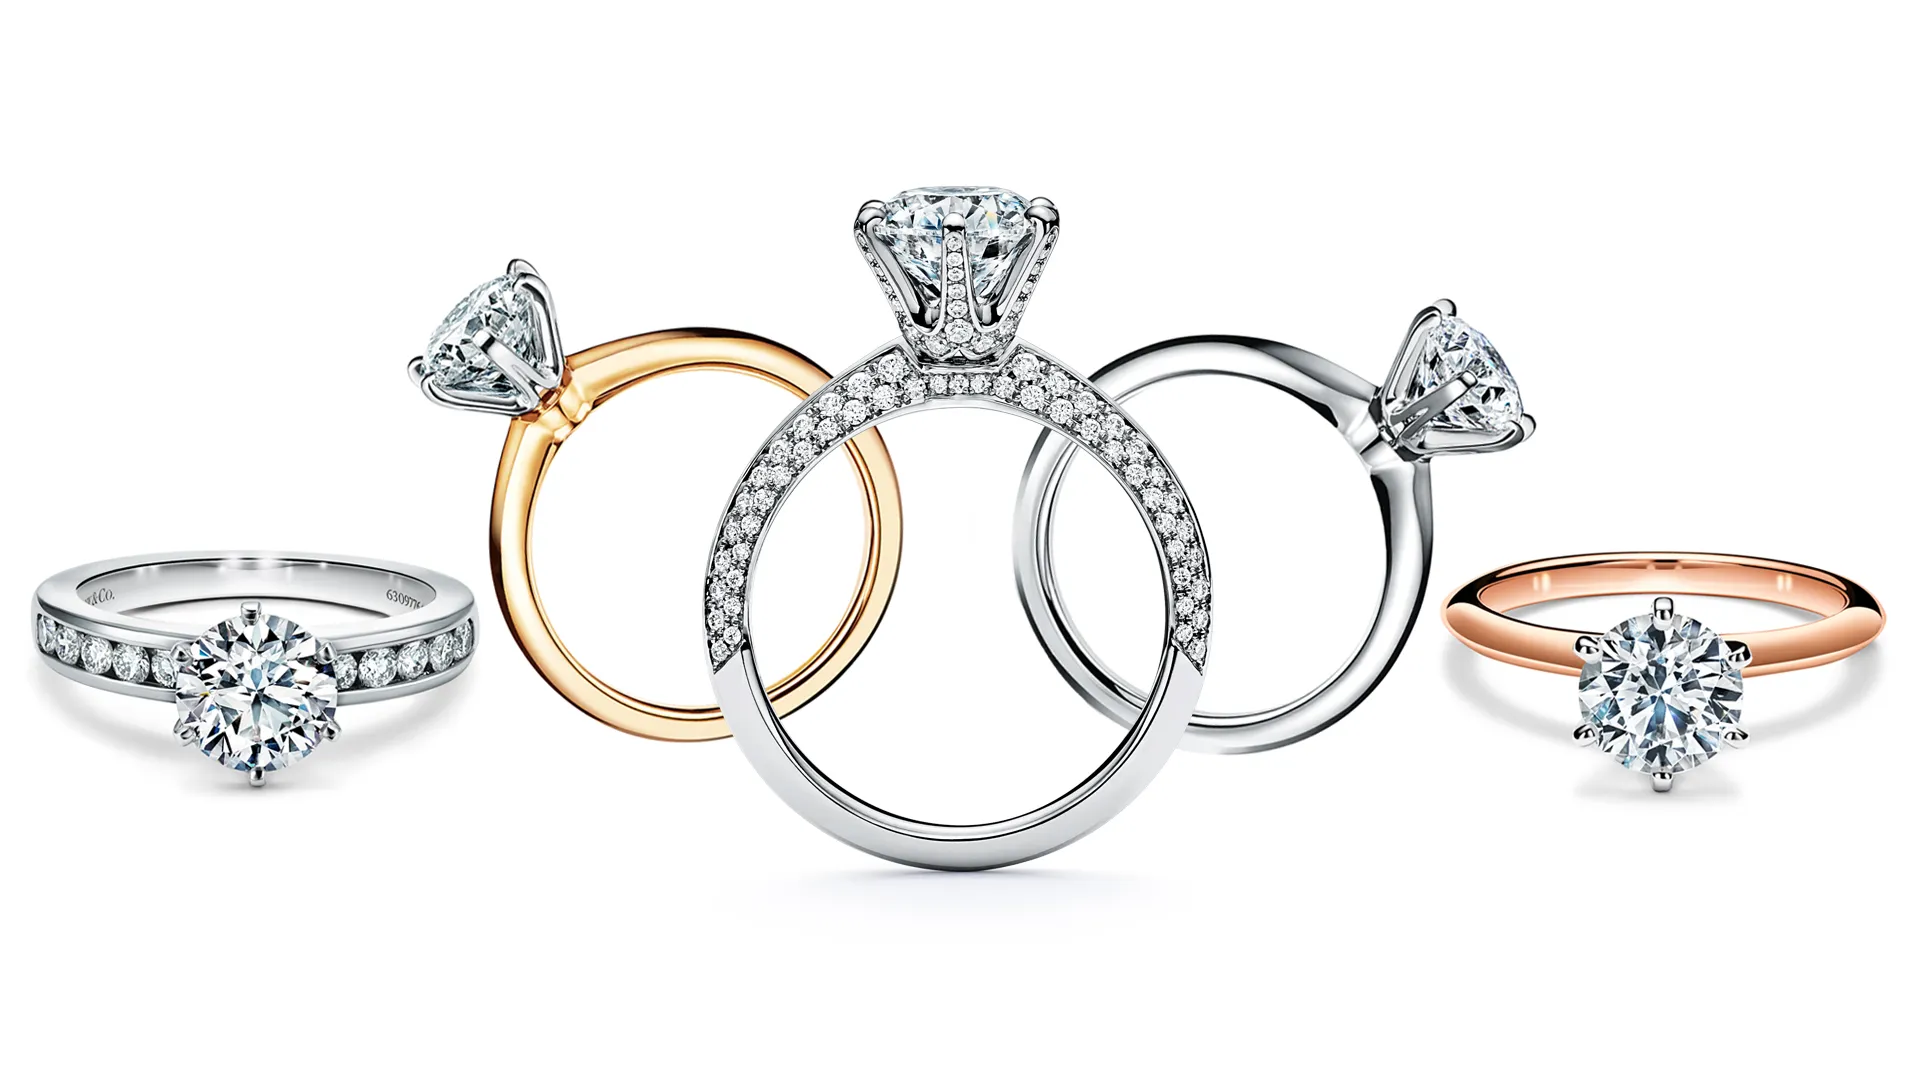 4 Advice on selecting an engagement ring